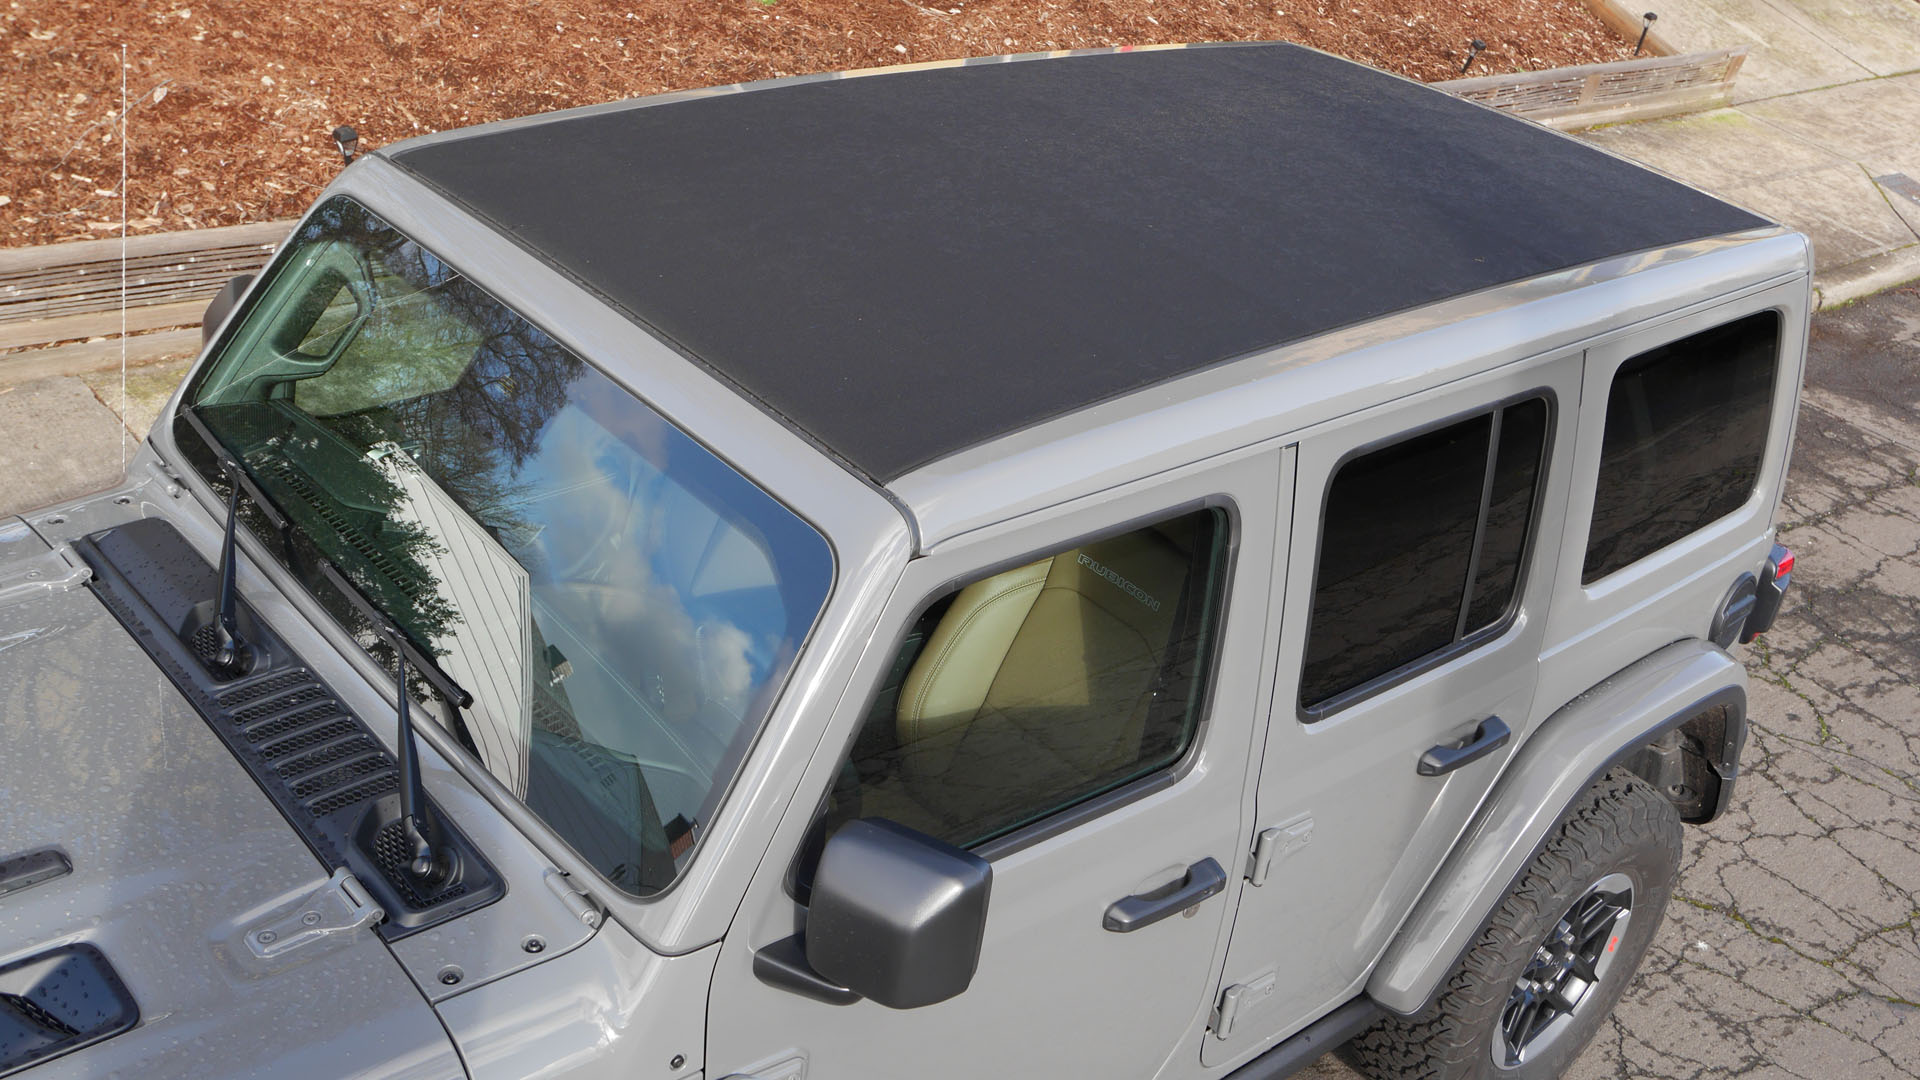 Is the Jeep Wrangler's Sky Power Top worth the extra cost